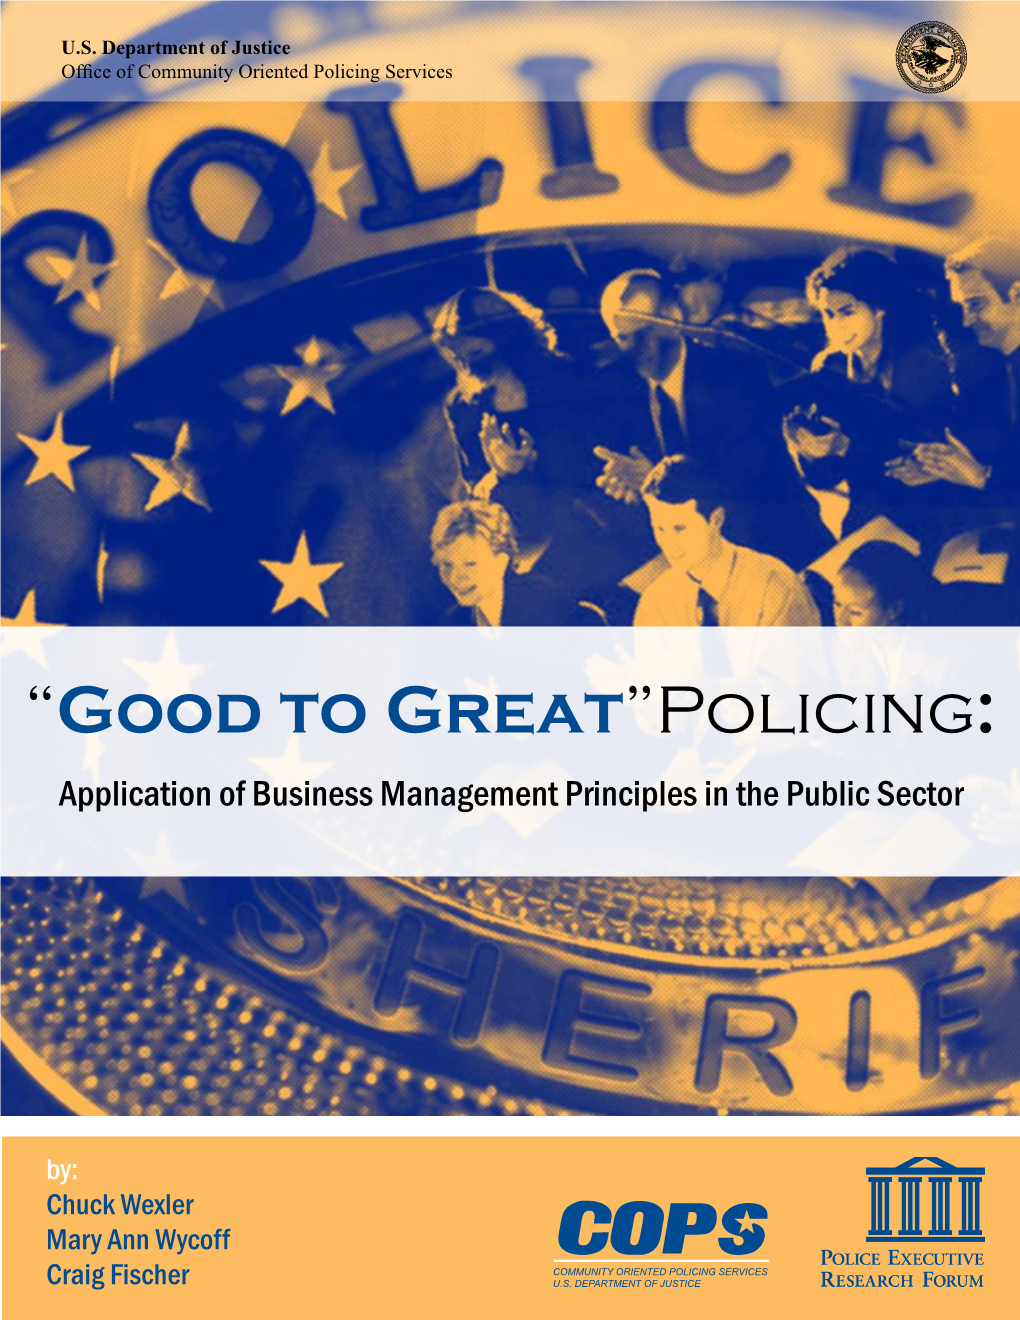 ""Good to Great" Policing: Application of Business Management Principles in the Public Sector